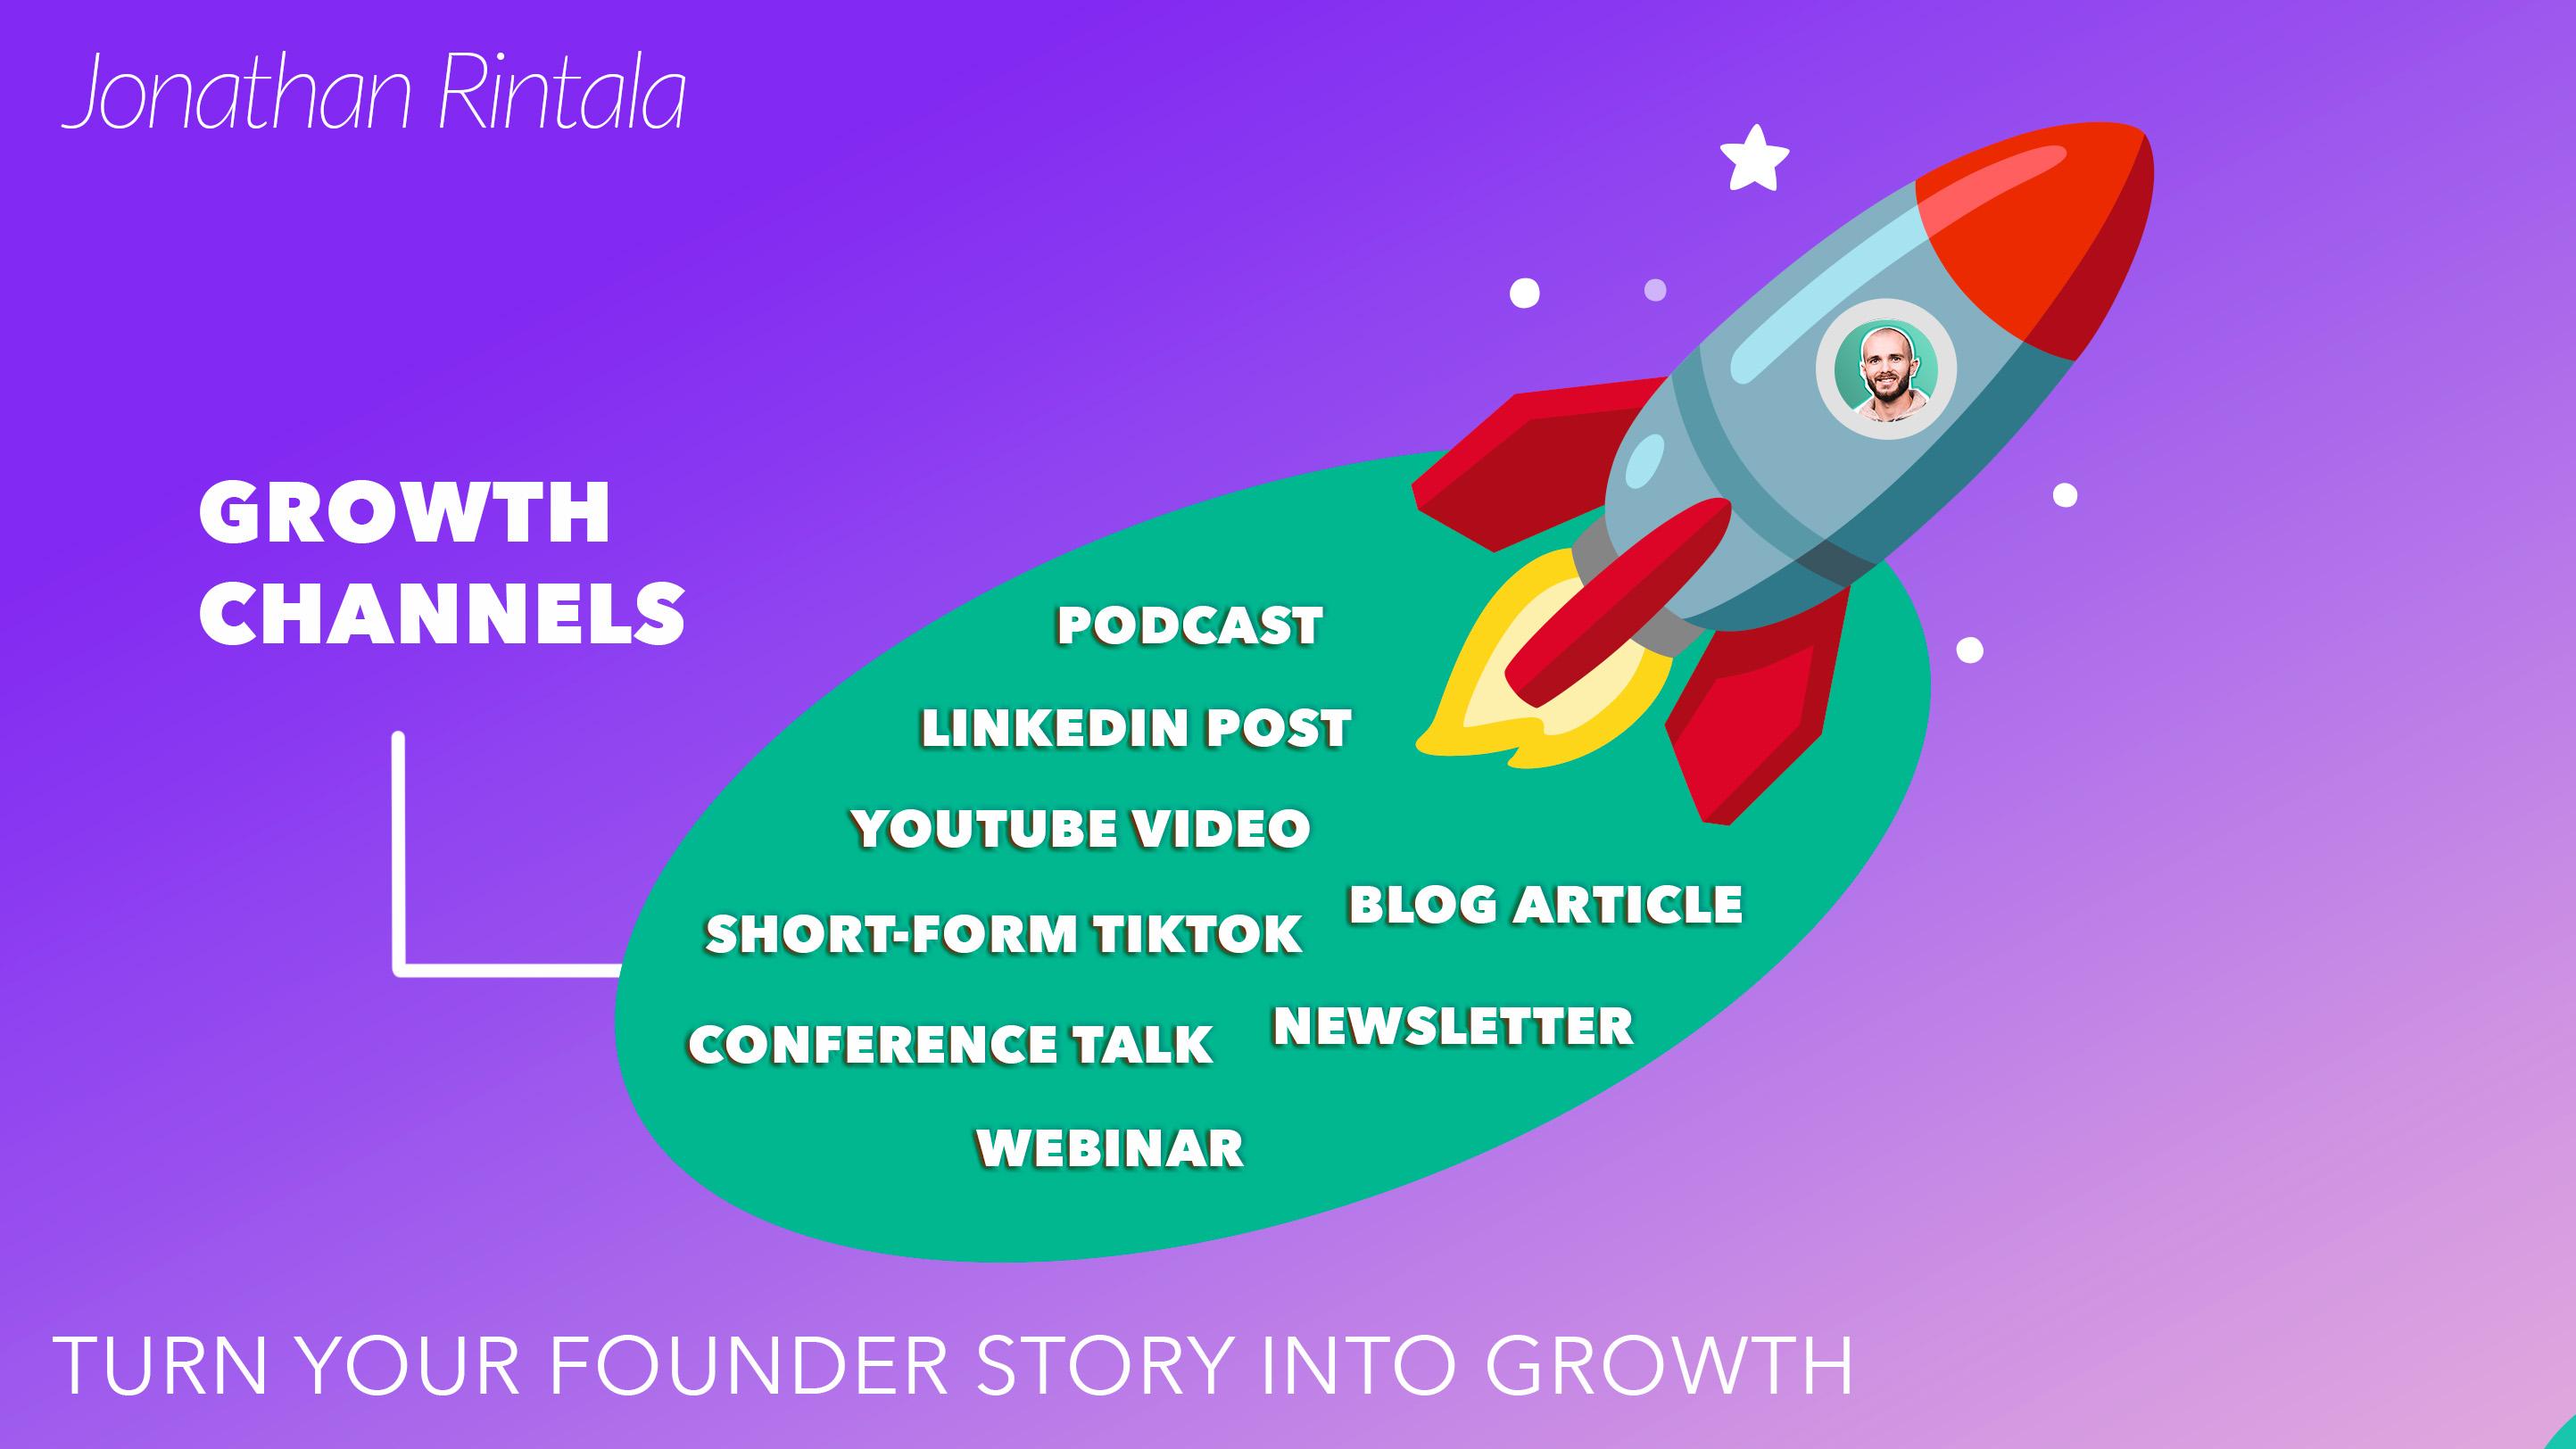 Growth channels: Turning your founder story into growth